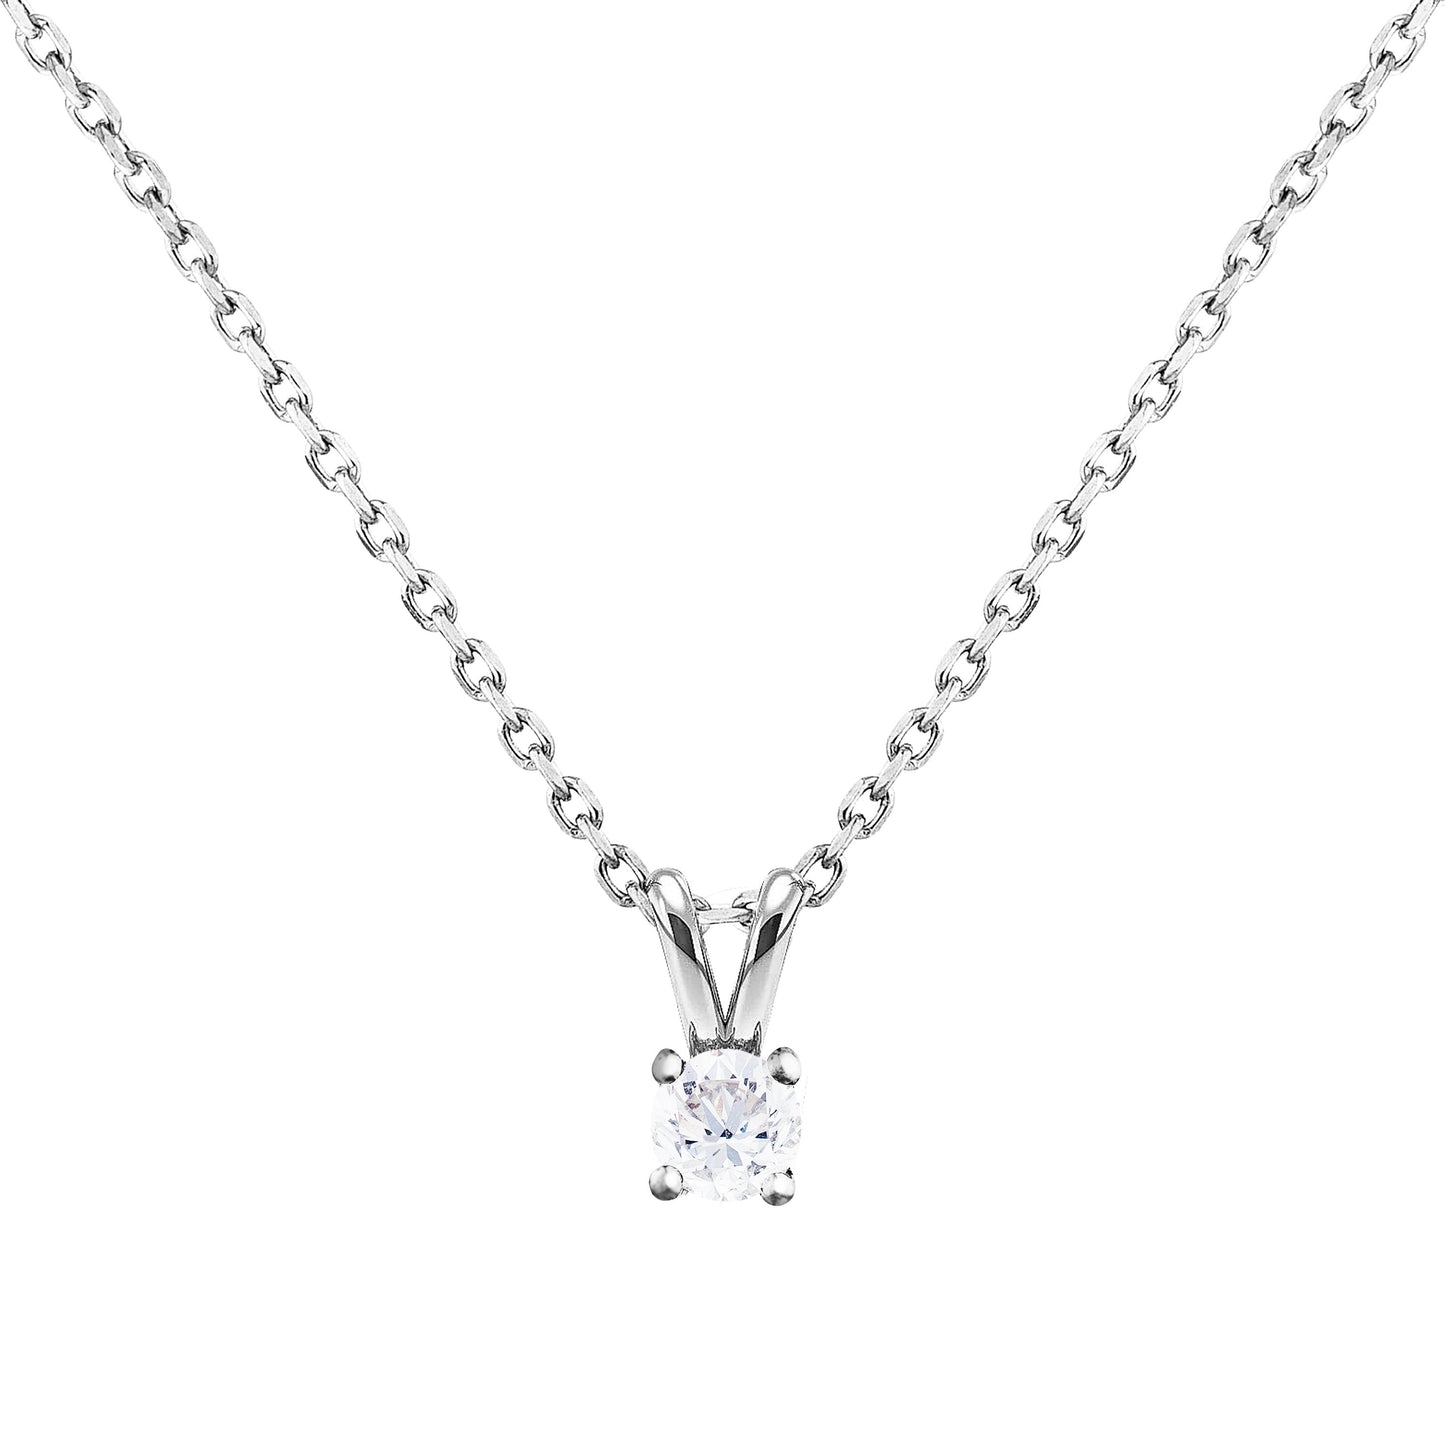 Perfect Pair Diamond Solitaire Pendant in 18ct White Gold